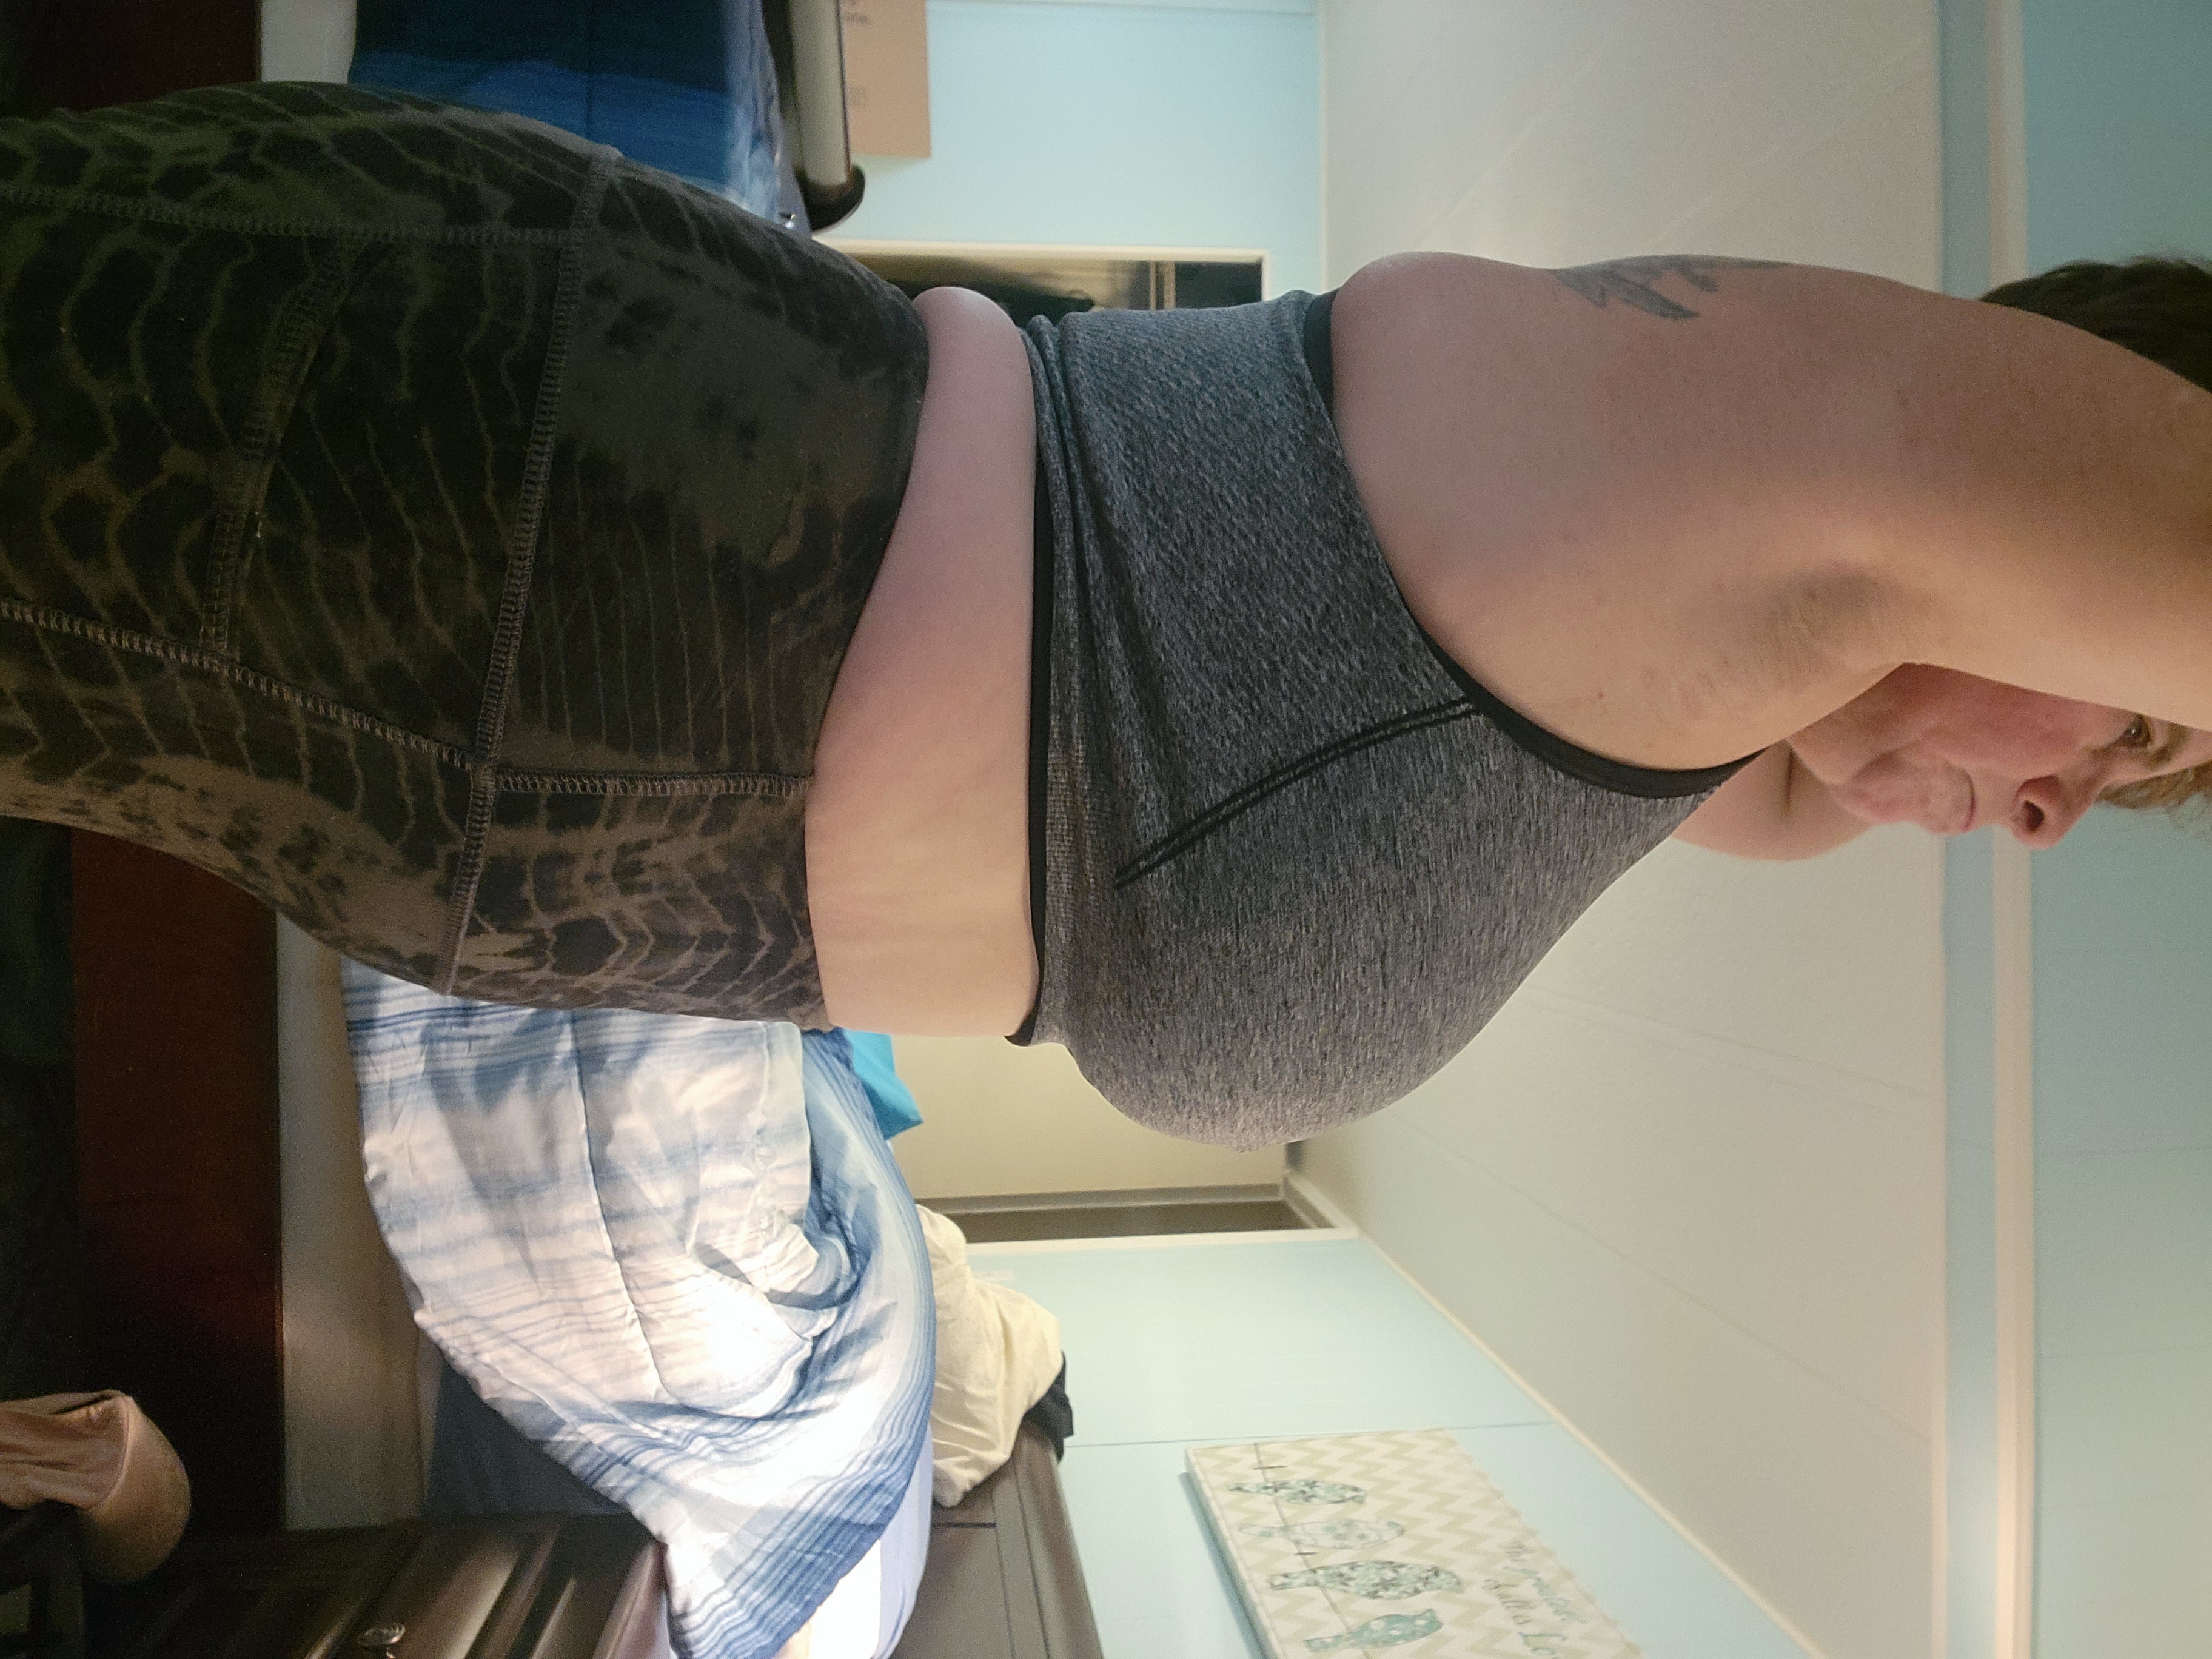 I tried both Shapermint and Underoutfit for my 28E bra size